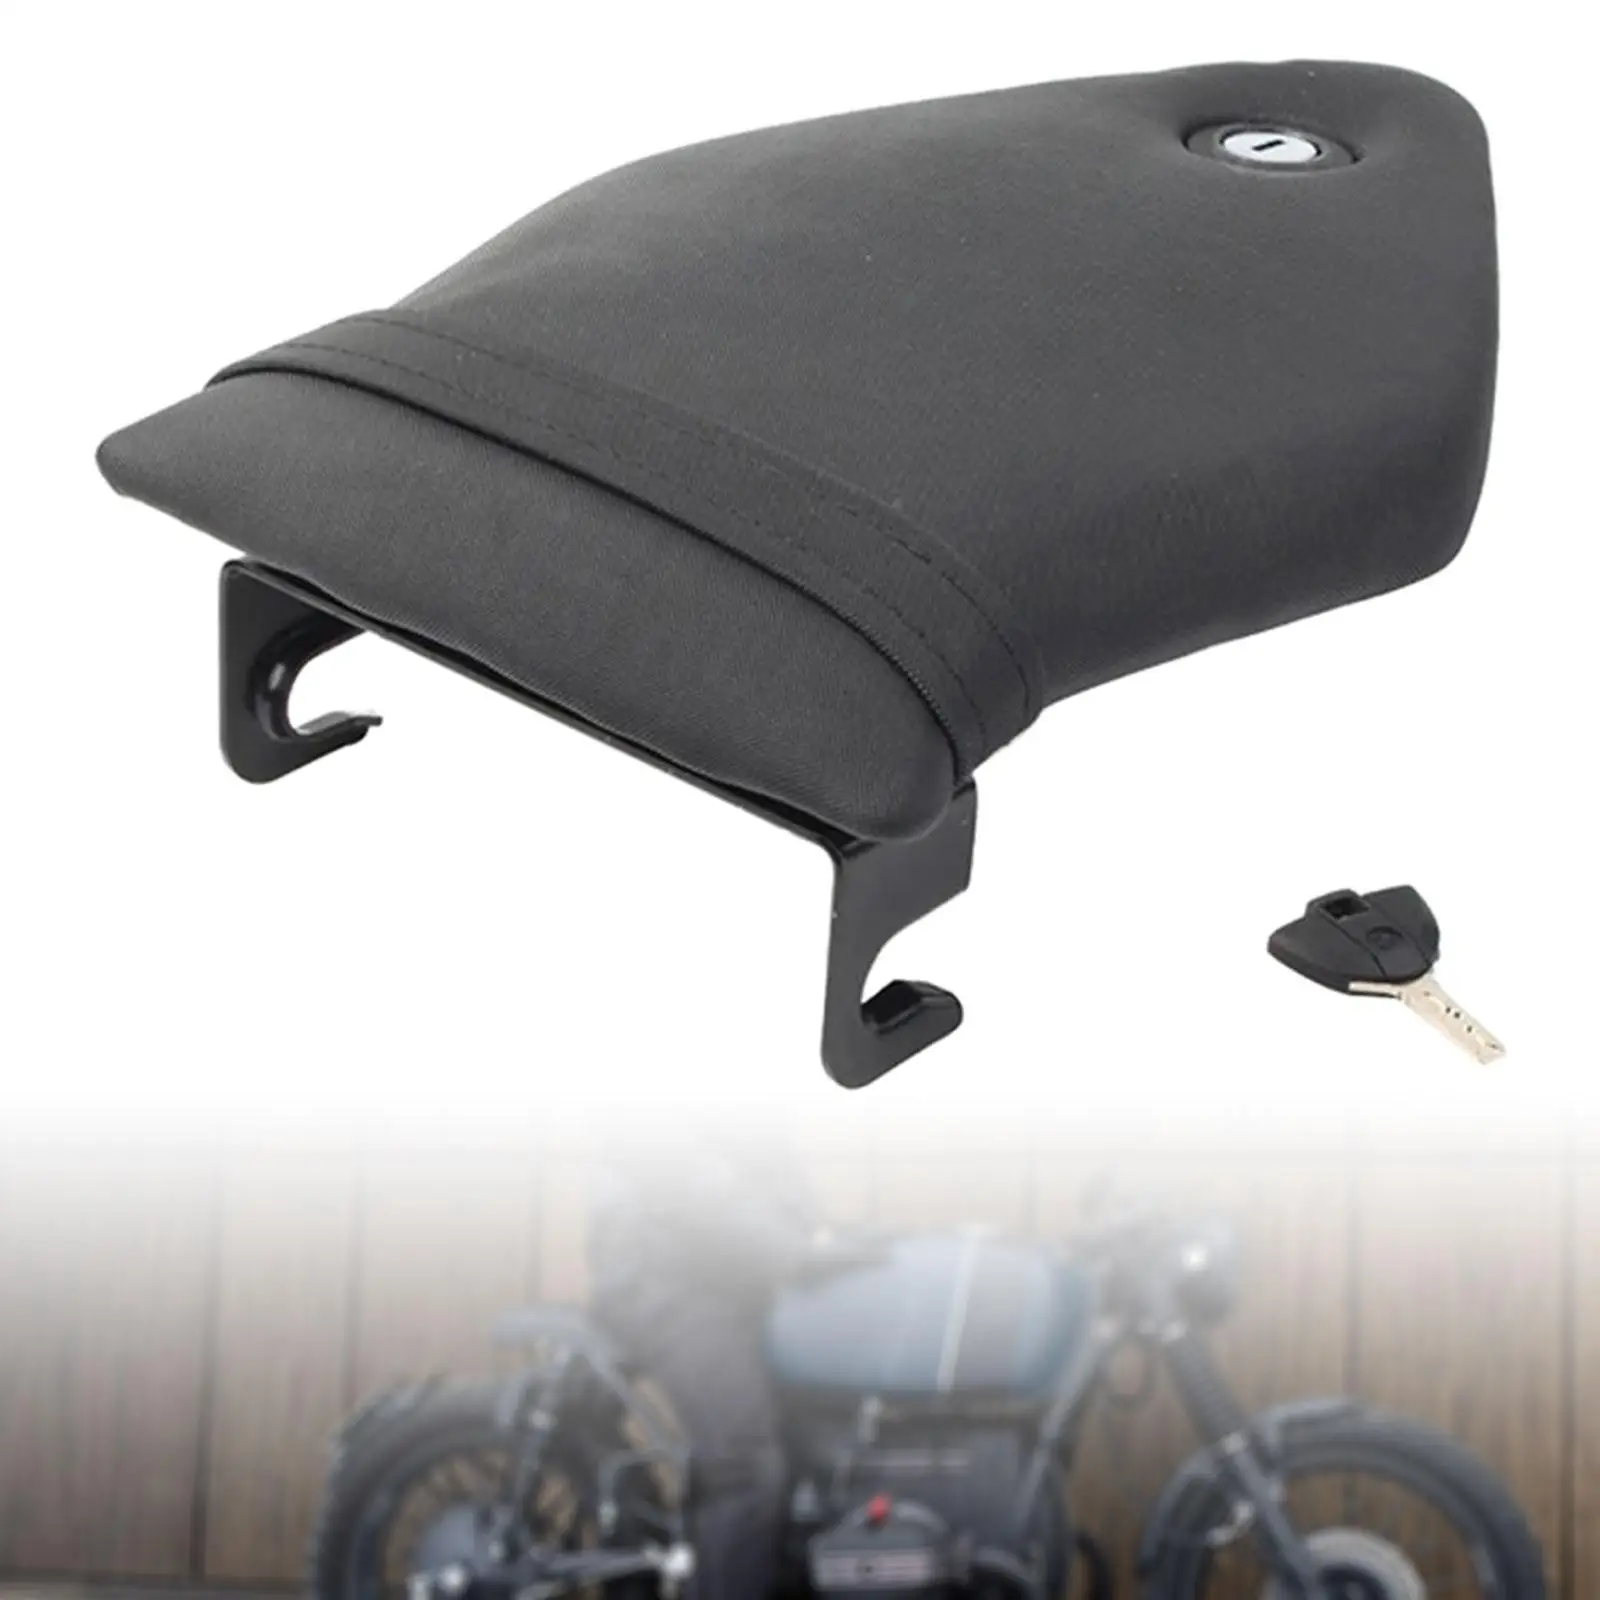 Rear Passanger Seat Pillion Cushion PU Leather for S1000rr 2009-2017